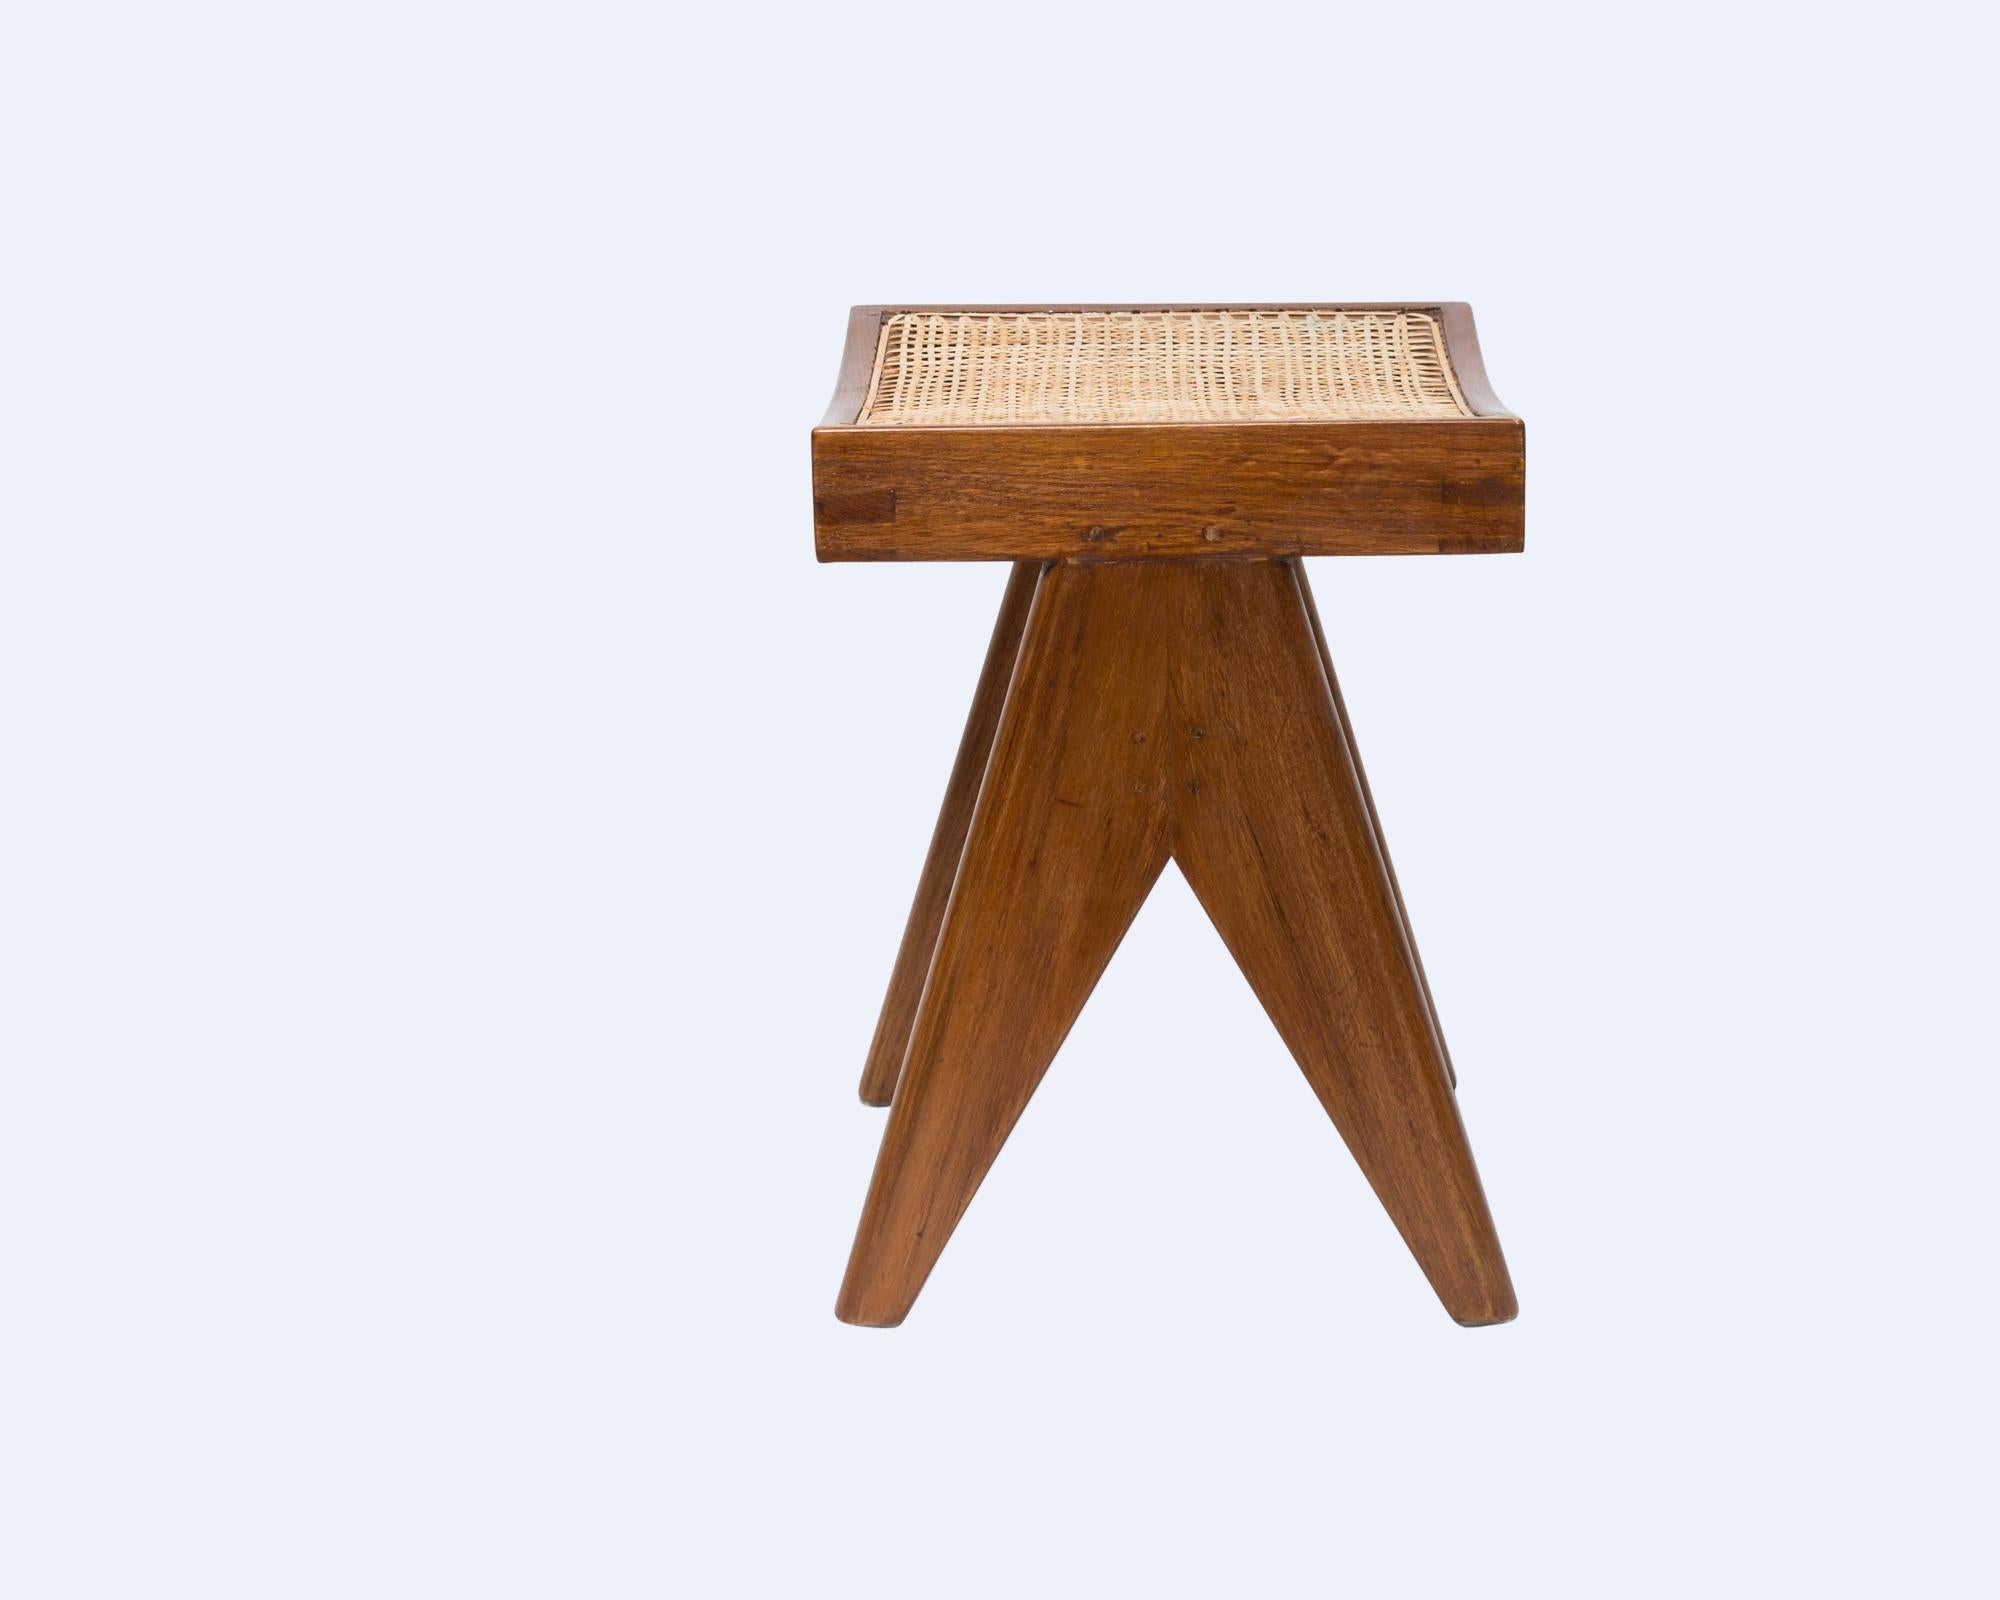 Pierre Jeanneret stool of teak
• Excellent condition for age
• Includes certificate of authenticity, certified by Jacques Dworczak, world-renowned Pierre Jeanneret authenticator and collector, author of the Assouline book 